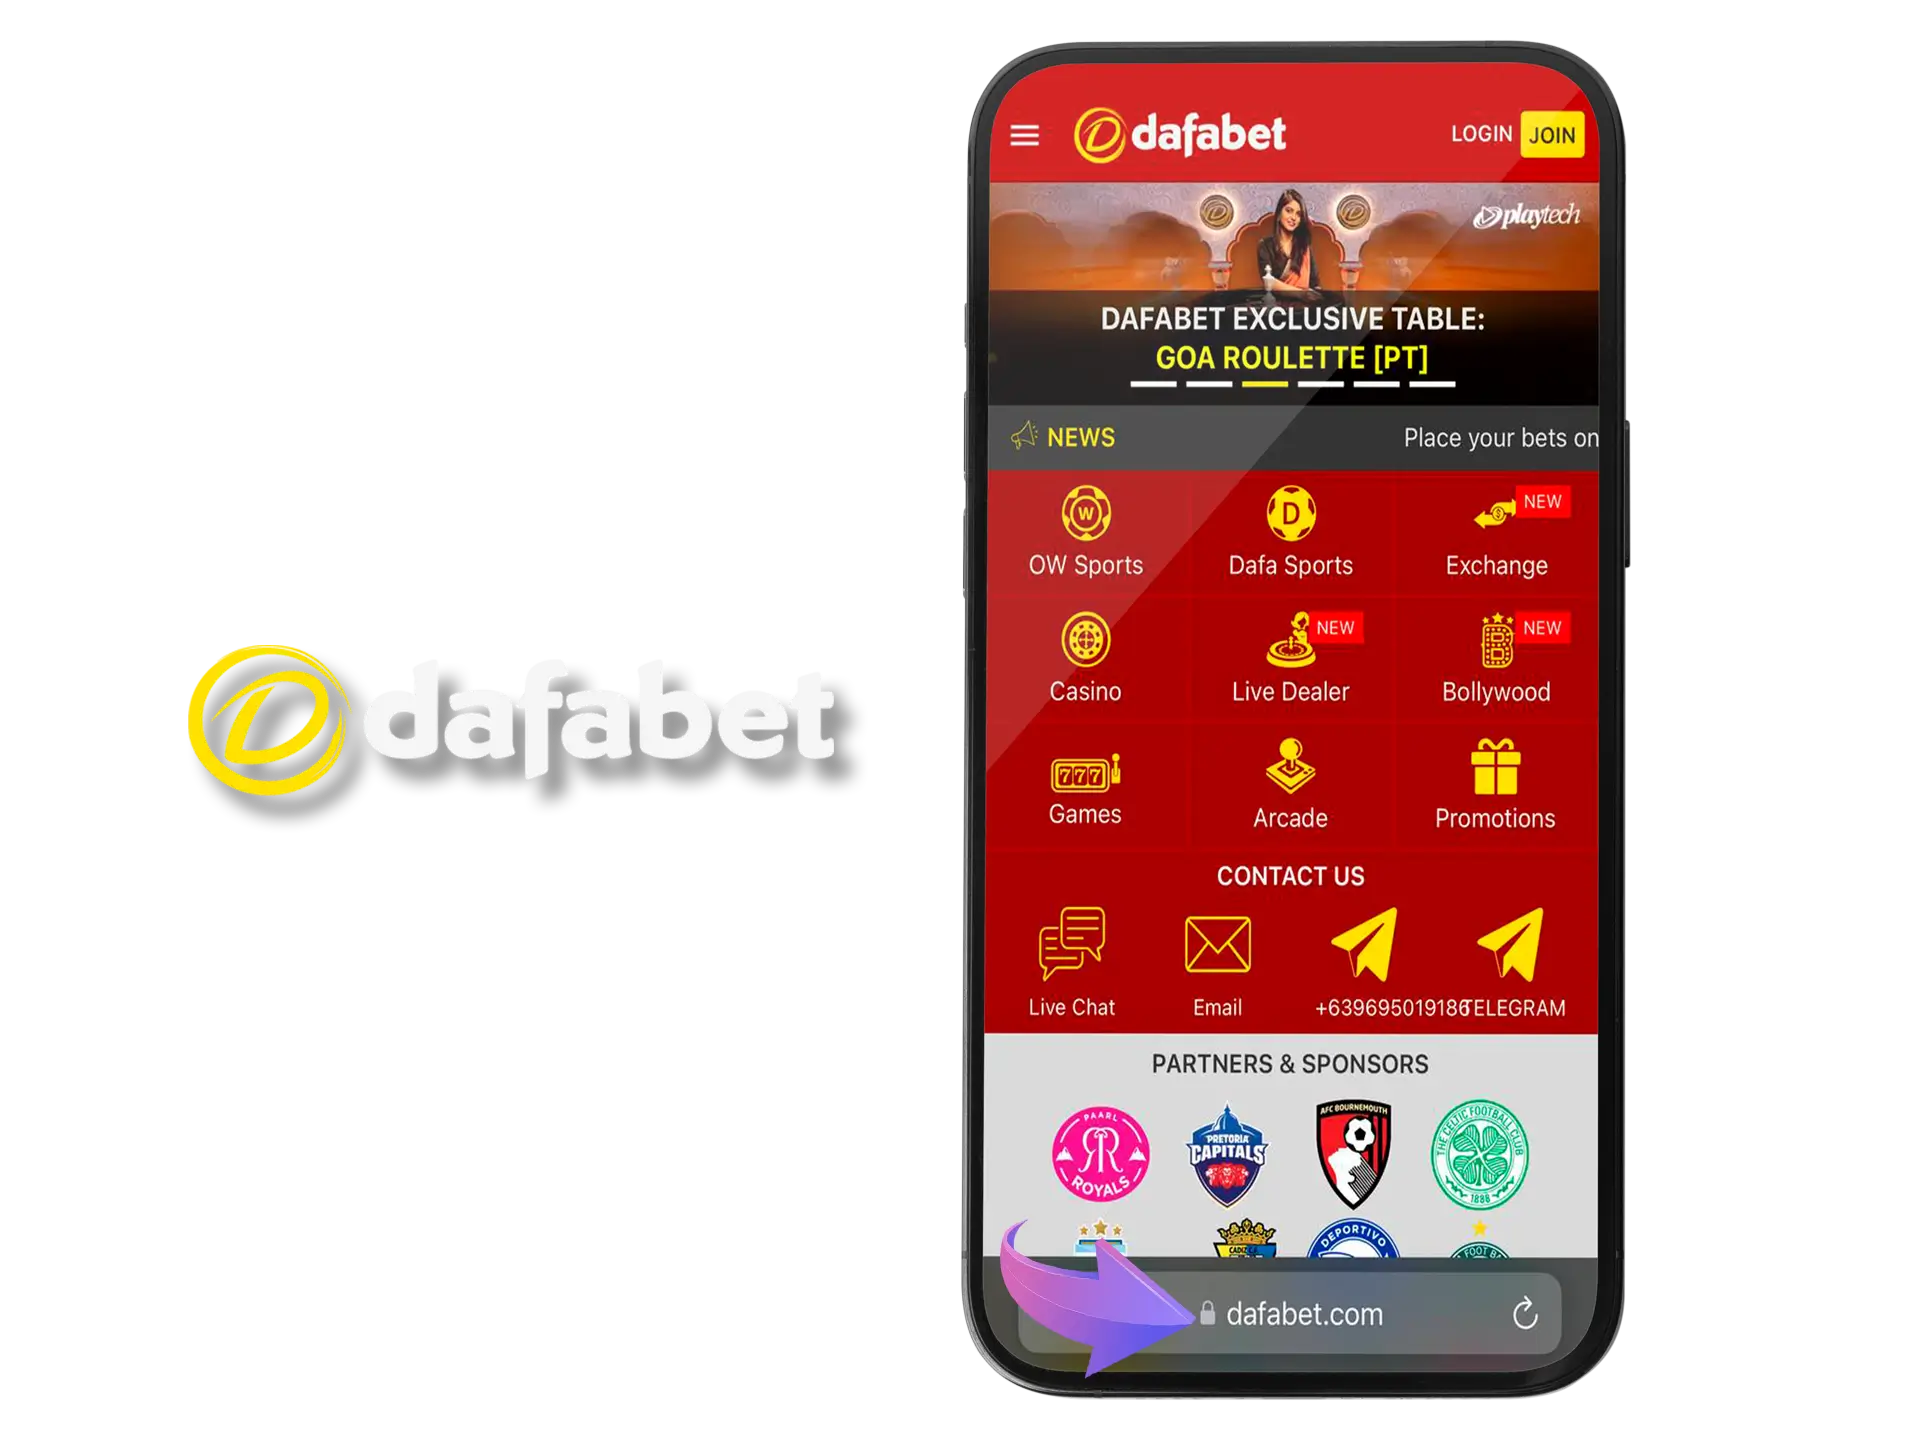 Type Dafabet's official website into your browser's address bar.